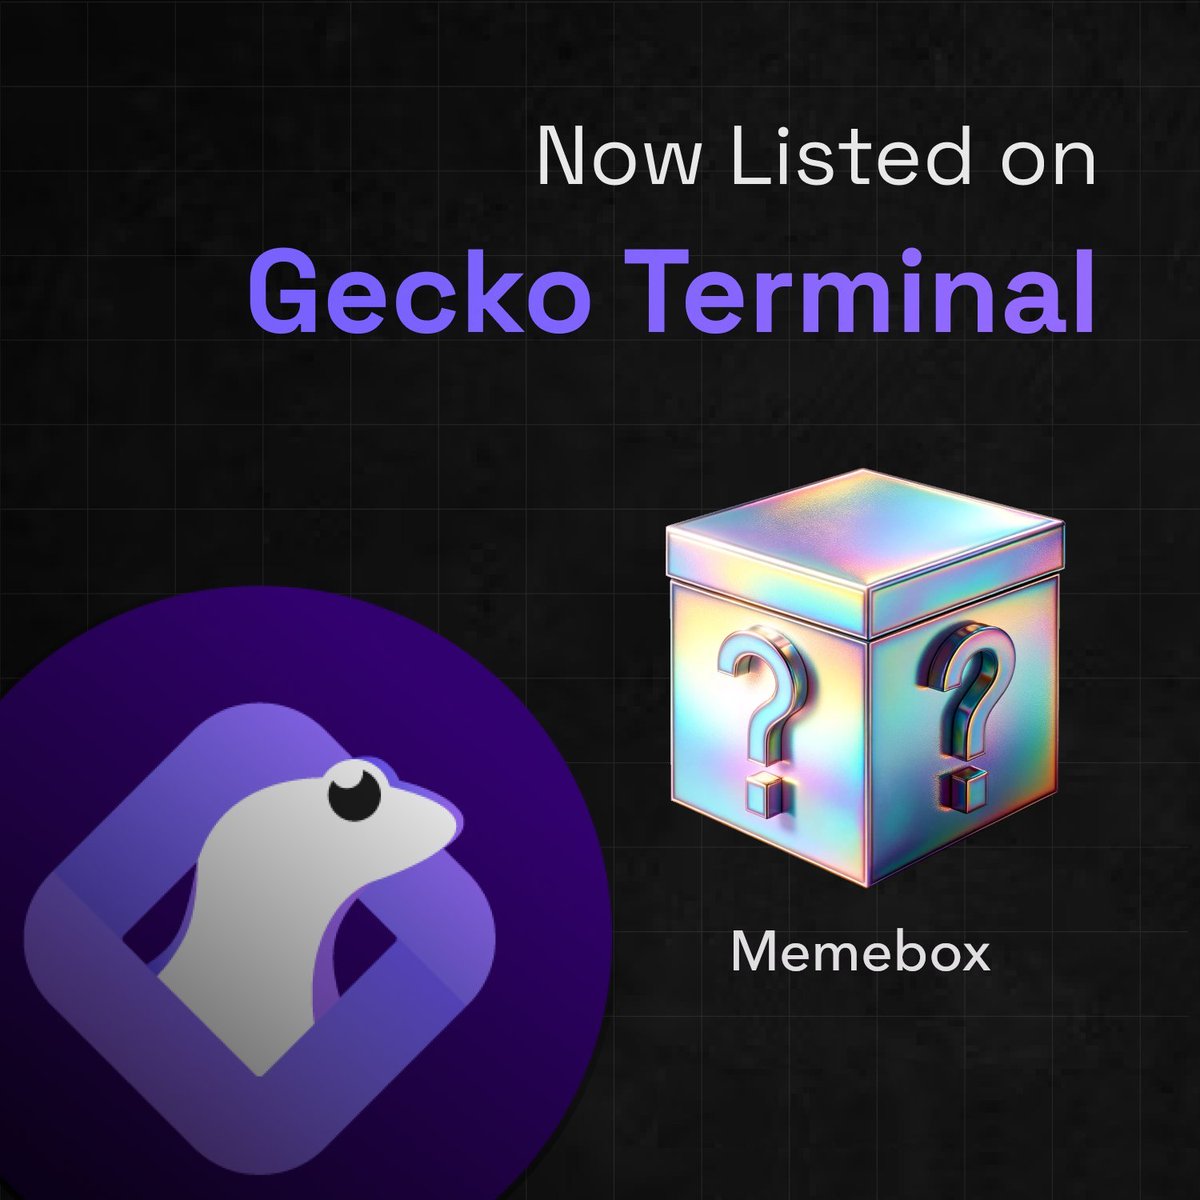 📢 Integration Announcement! Memebox is now live on GeckoTerminal. Thank you for the swift integration @coingecko & @GeckoTerminal 🤝